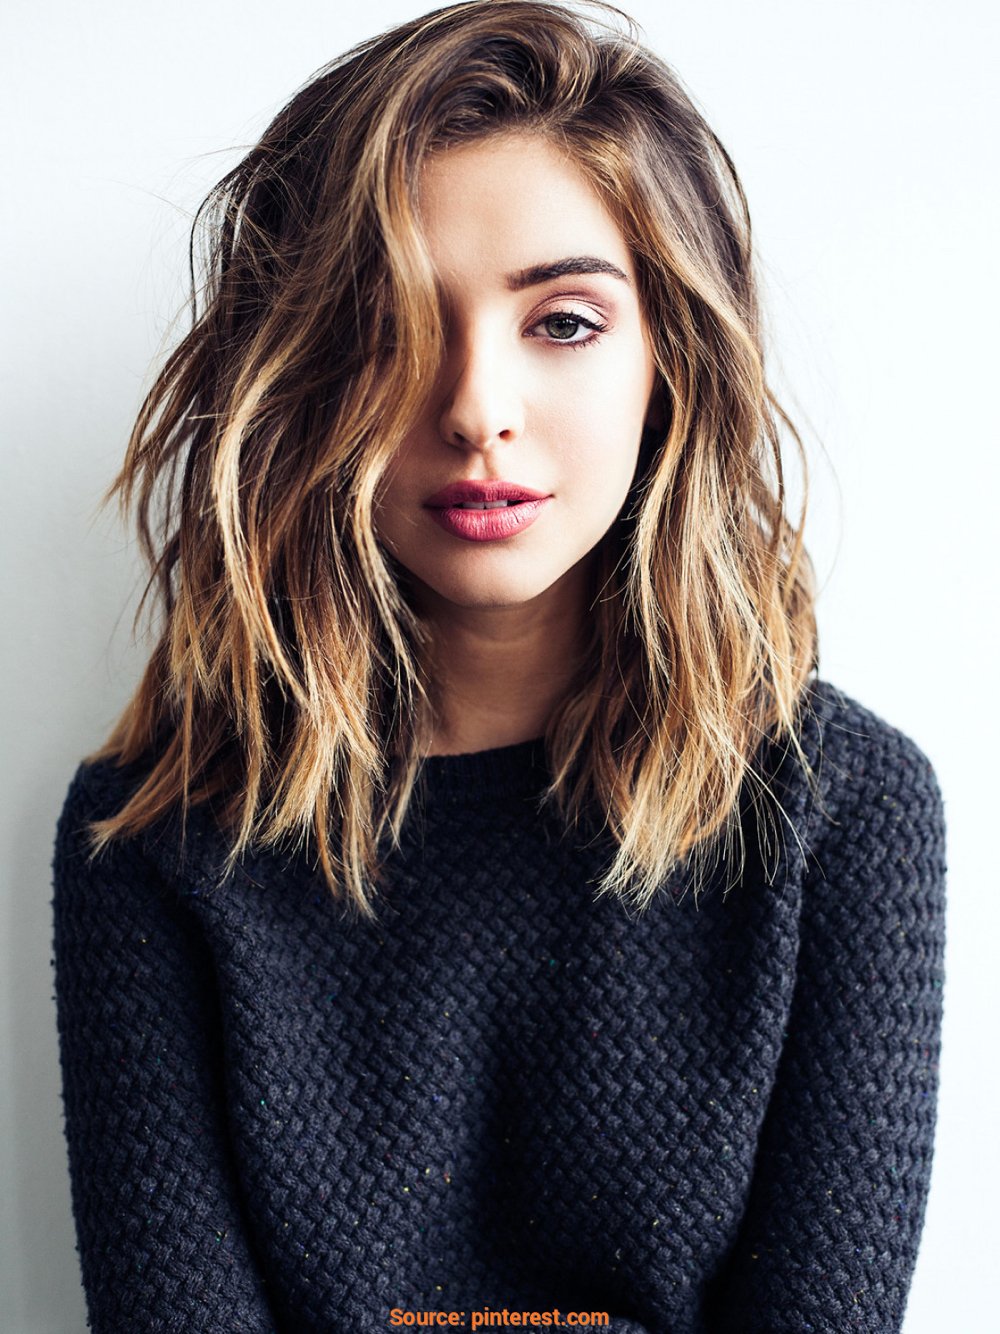 114 top shoulder length hair ideas to try (updated for 2019)